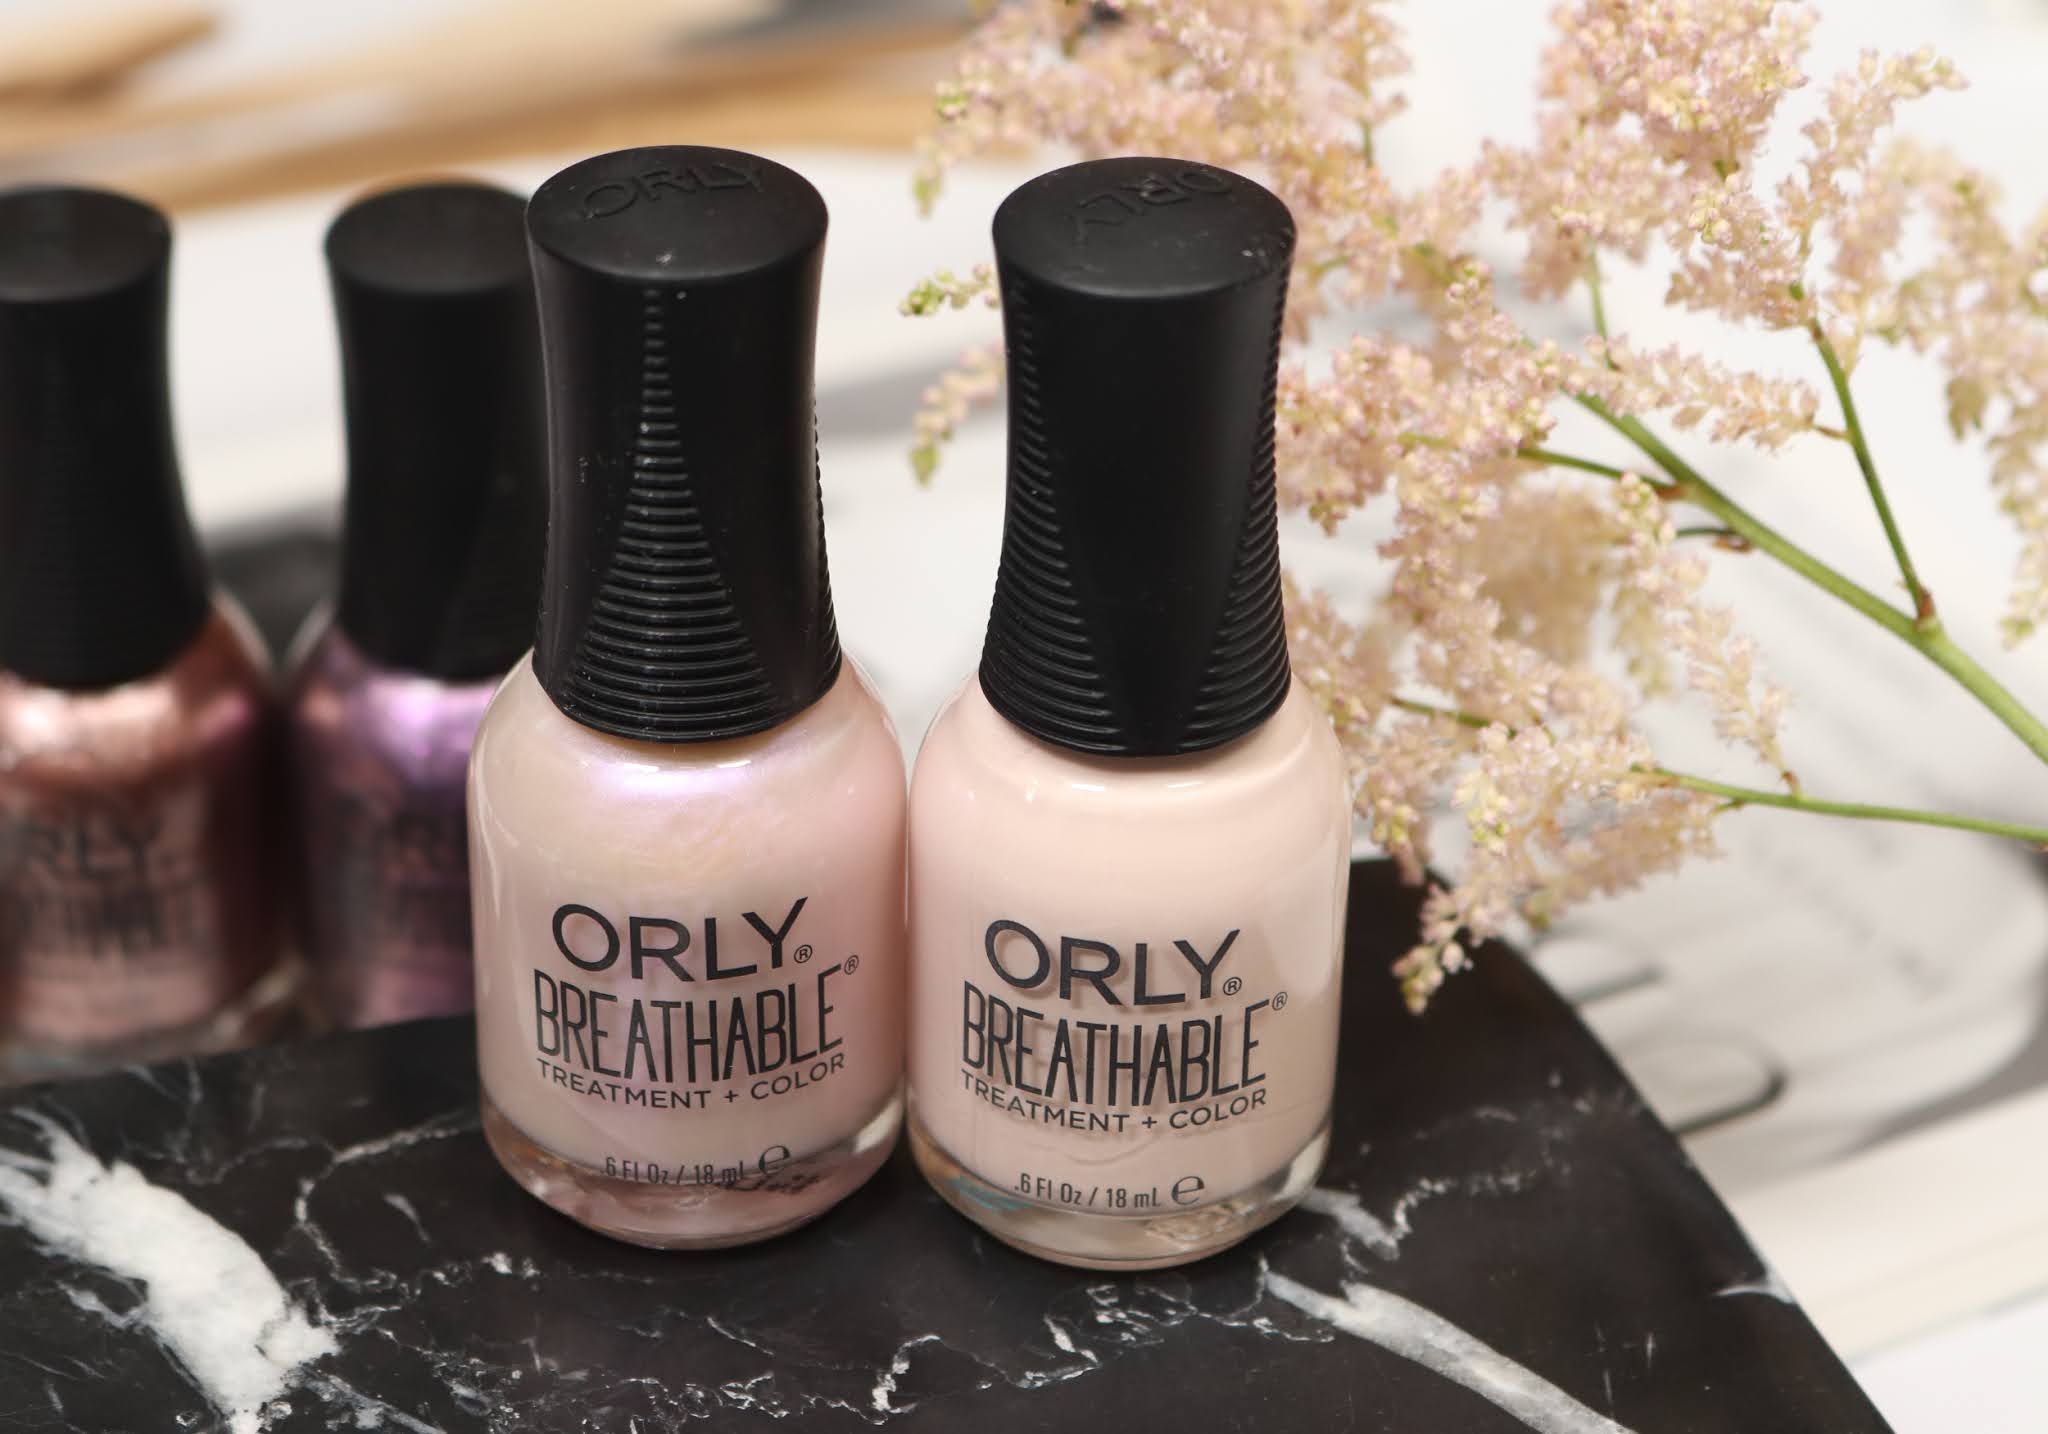 10. Orly Breathable Treatment + Color in "Pilates Hottie" - wide 1